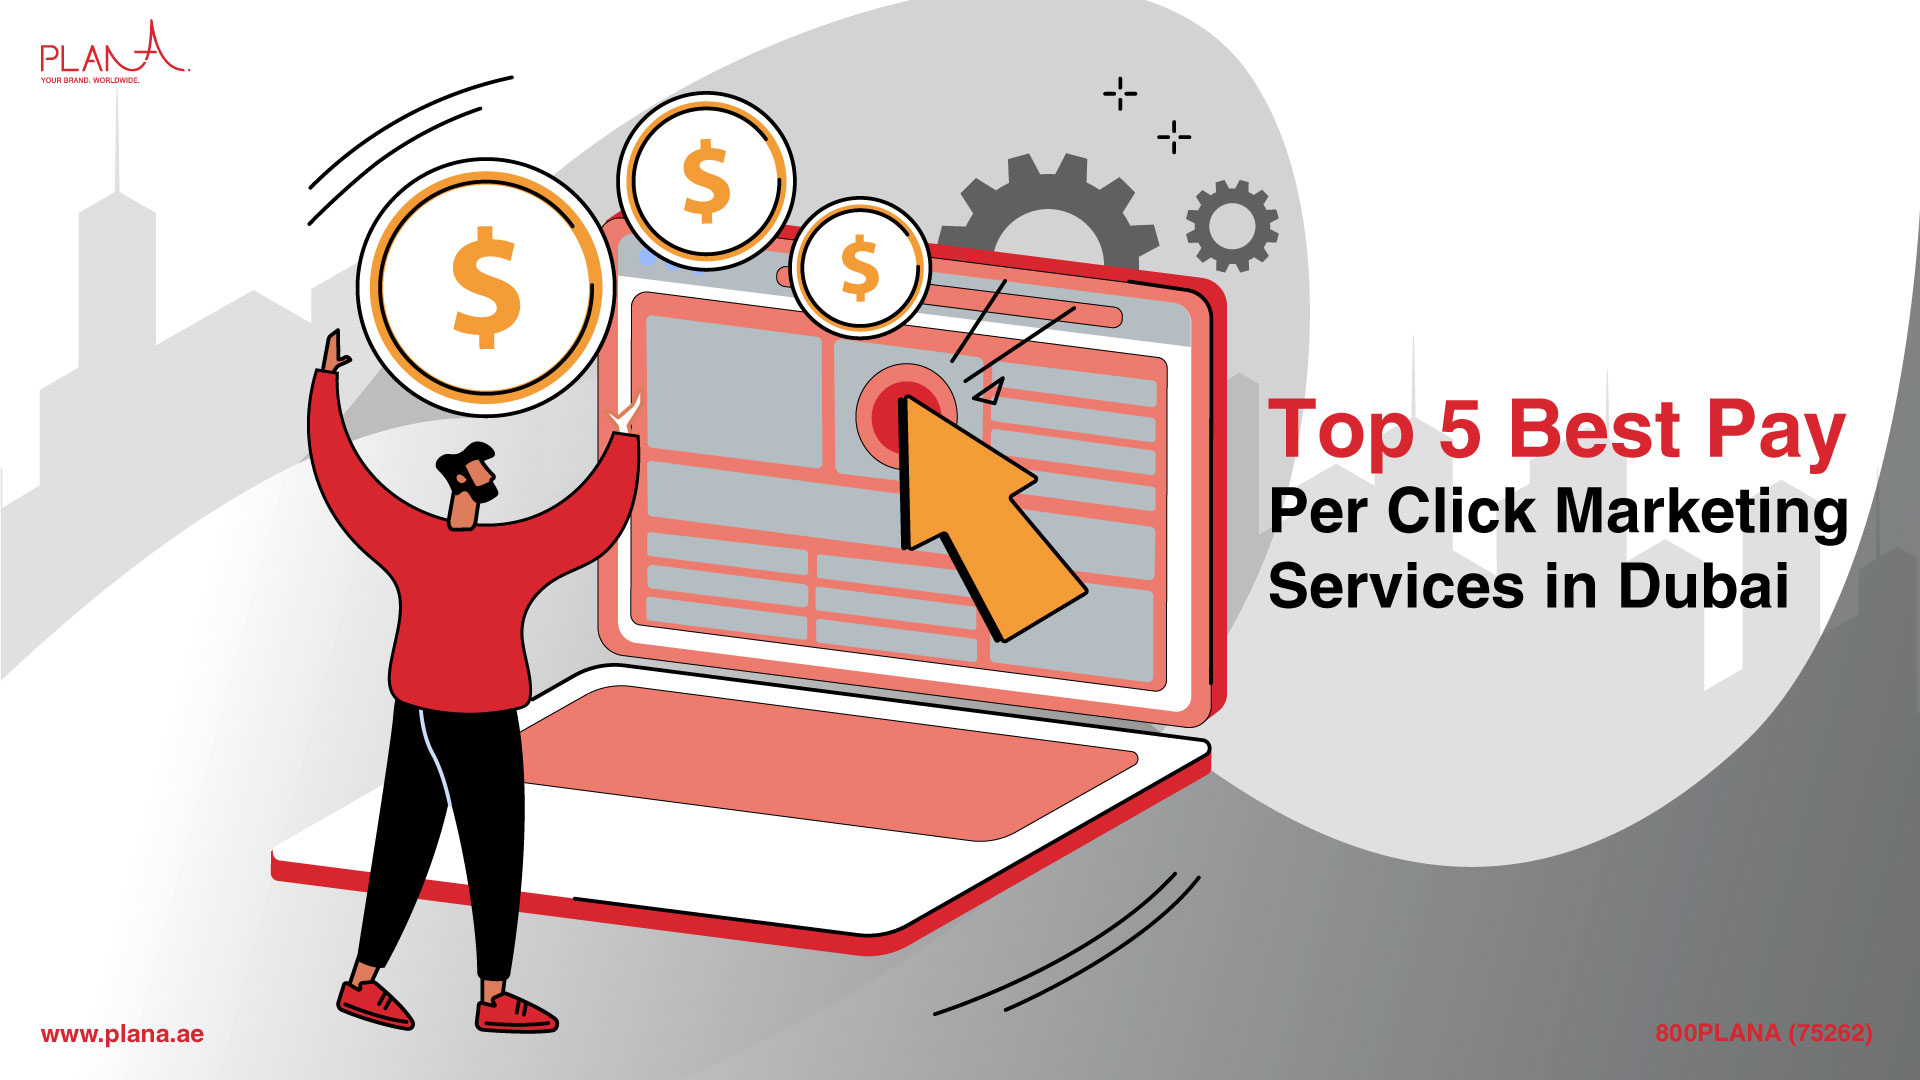 Top 5 Best Pay Per Click Marketing Services in Dubai